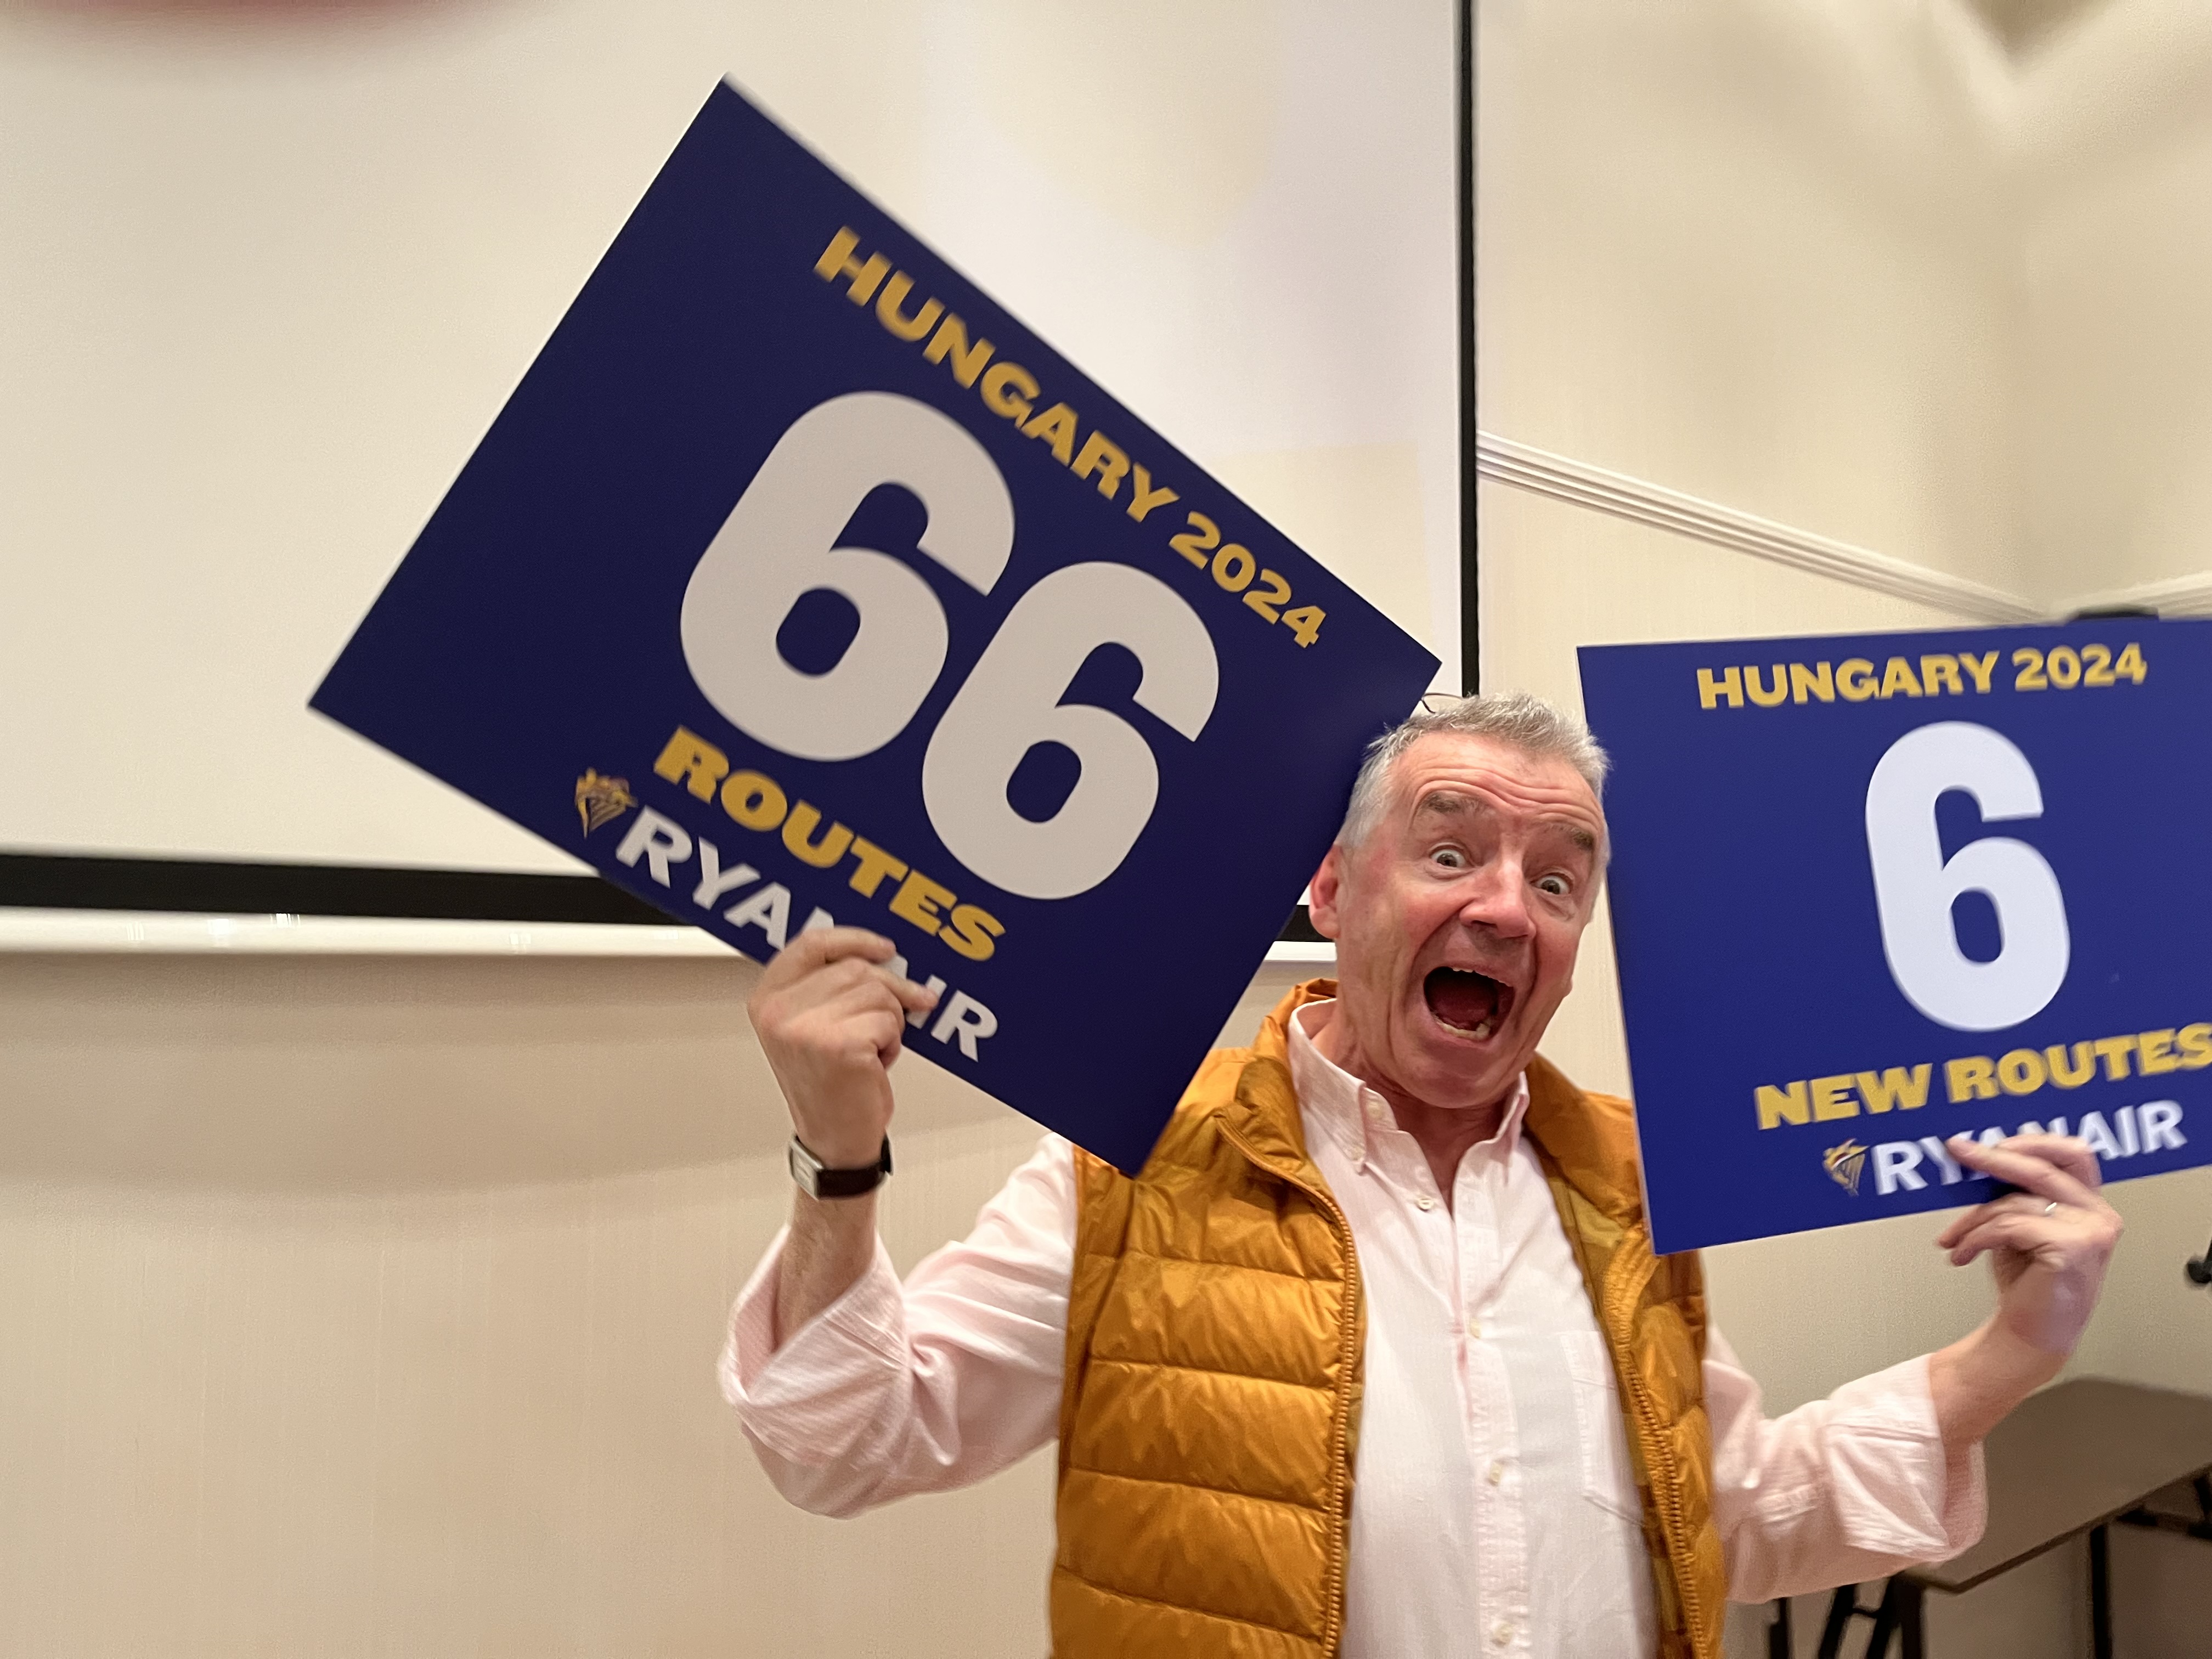 Ryanair to add 6 Routes, Aims to be Hungary’s #1 Airline in ...